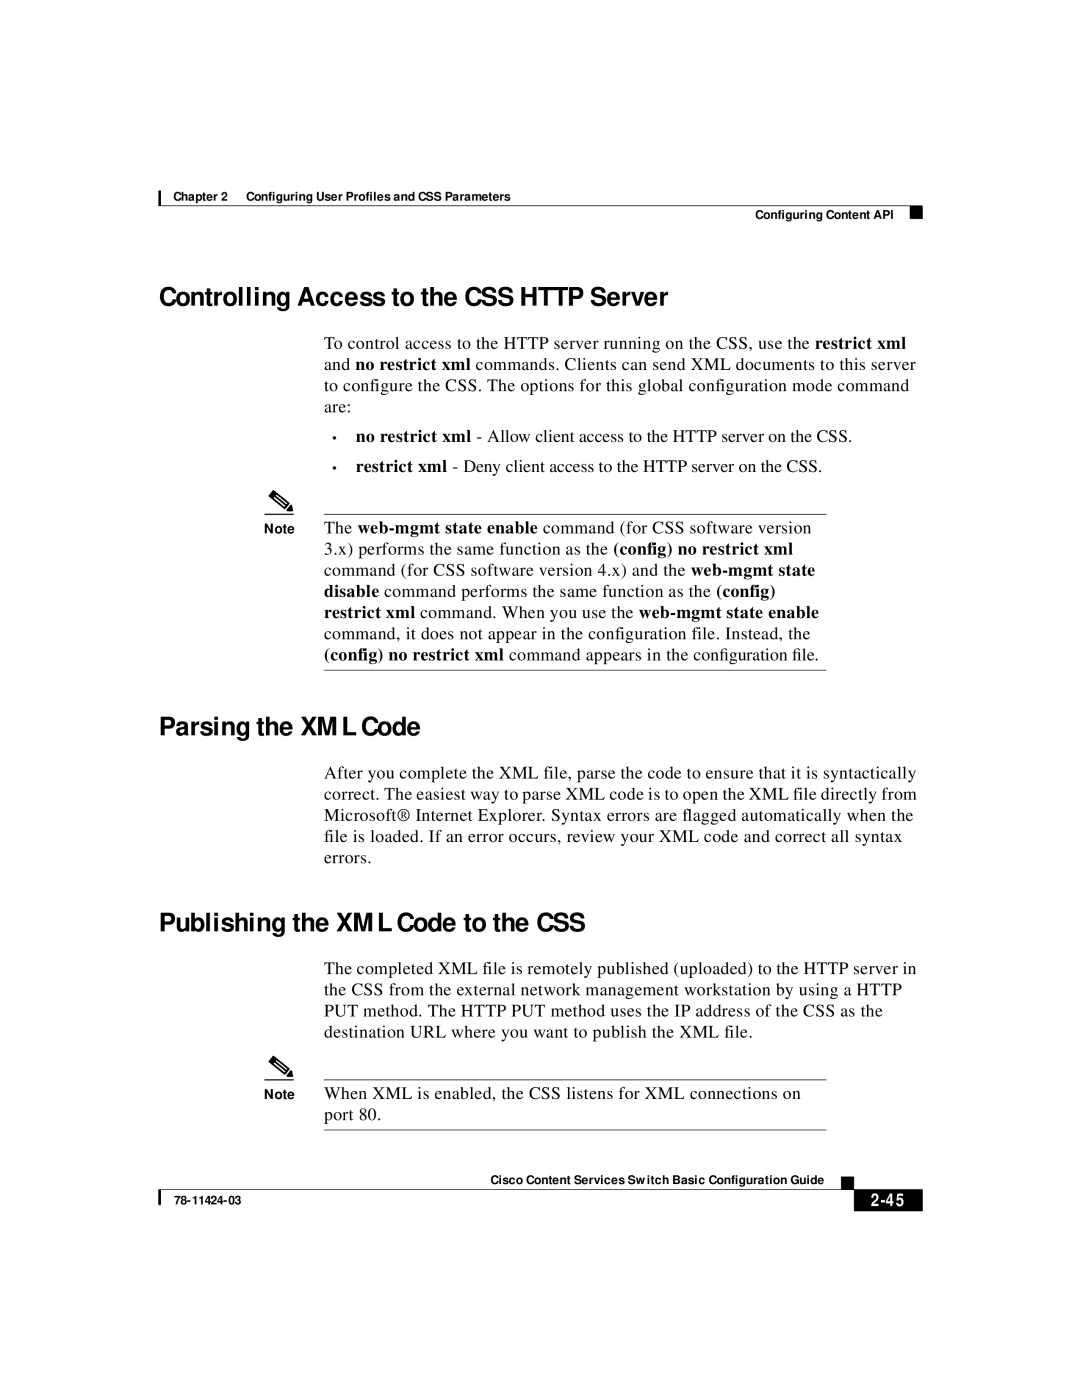 Cisco Systems 78-11424-03 manual Controlling Access to the CSS HTTP Server, Parsing the XML Code, 2-45 